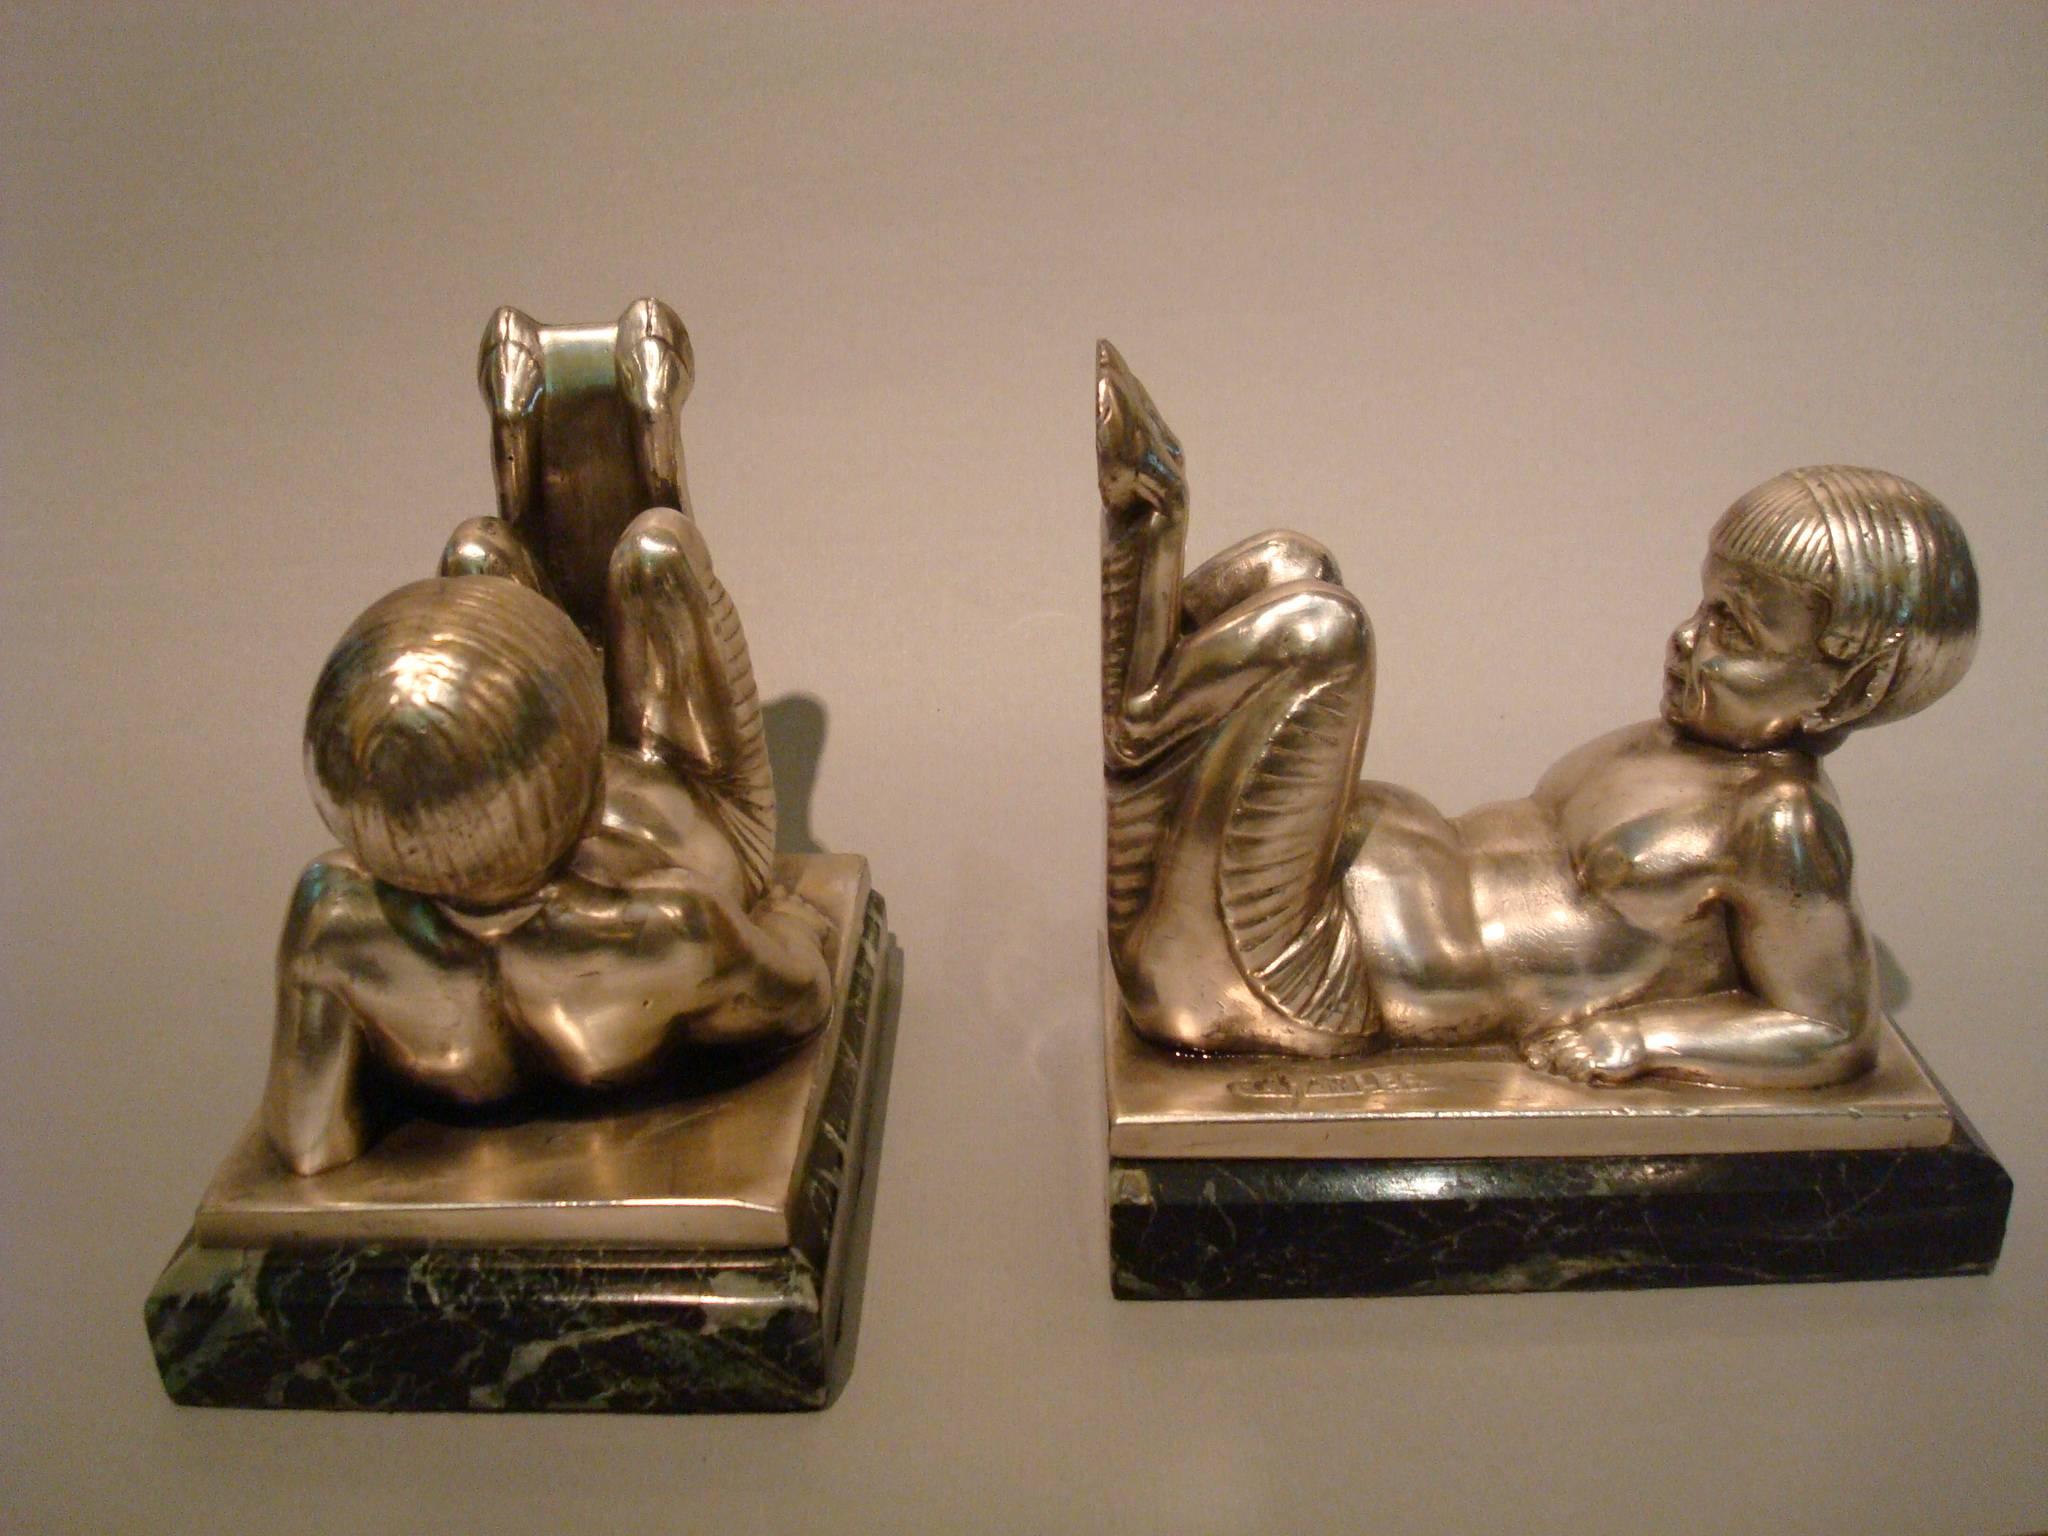 French Art Deco Bookends Young Satyrs by C. Charles on Marble Base, 1930 For Sale 1